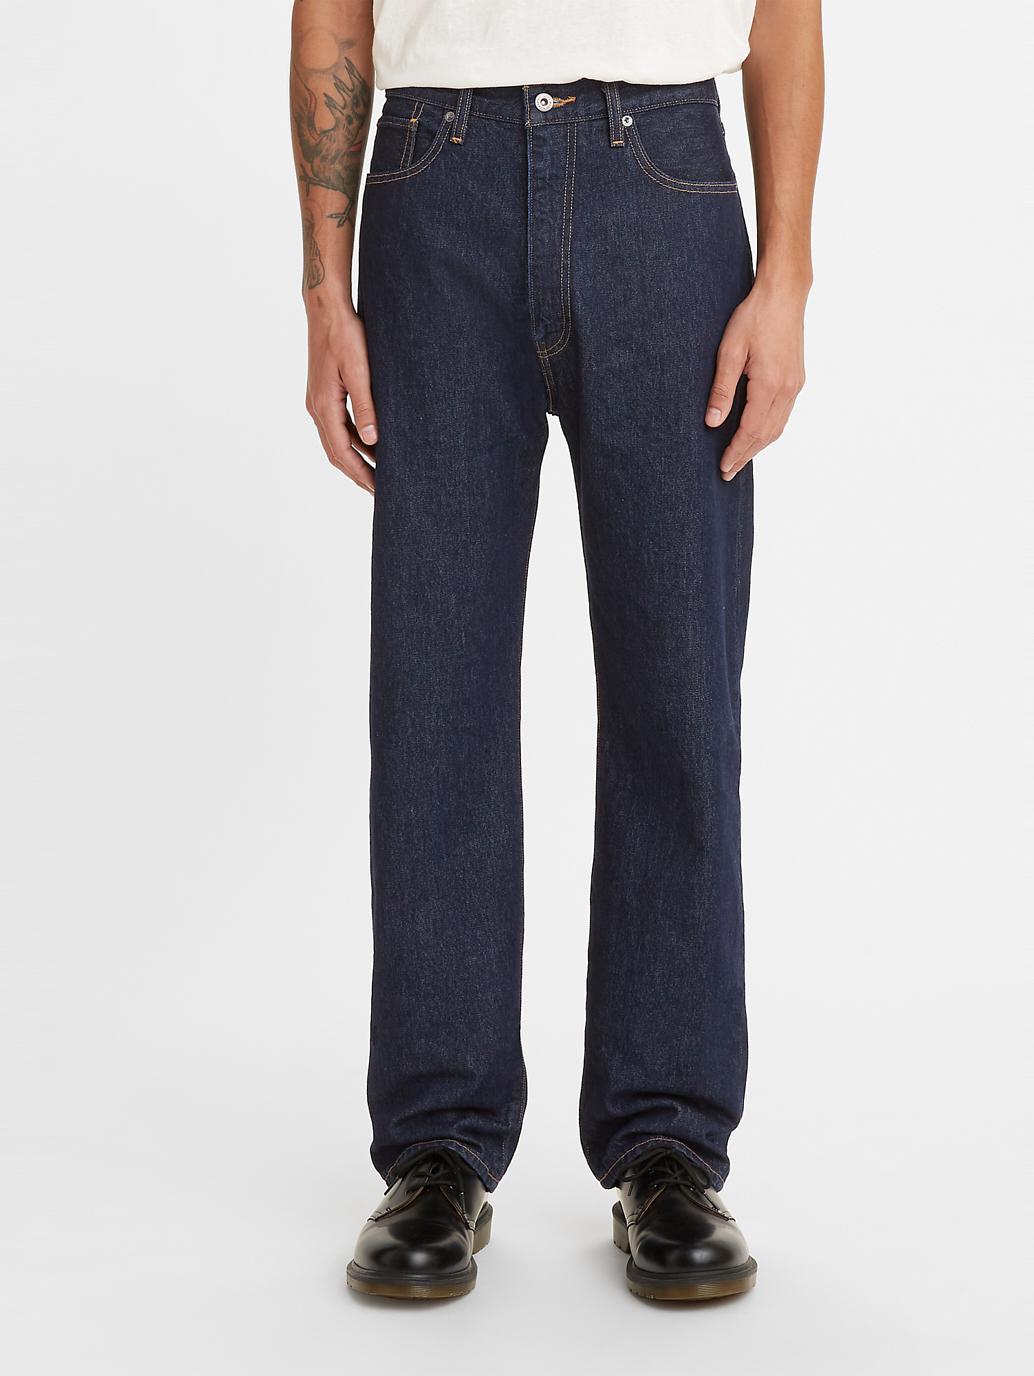 Buy Levi's® Made Crafted® Men's High Rise Straight Jeans | Levi's® Official Online Shop